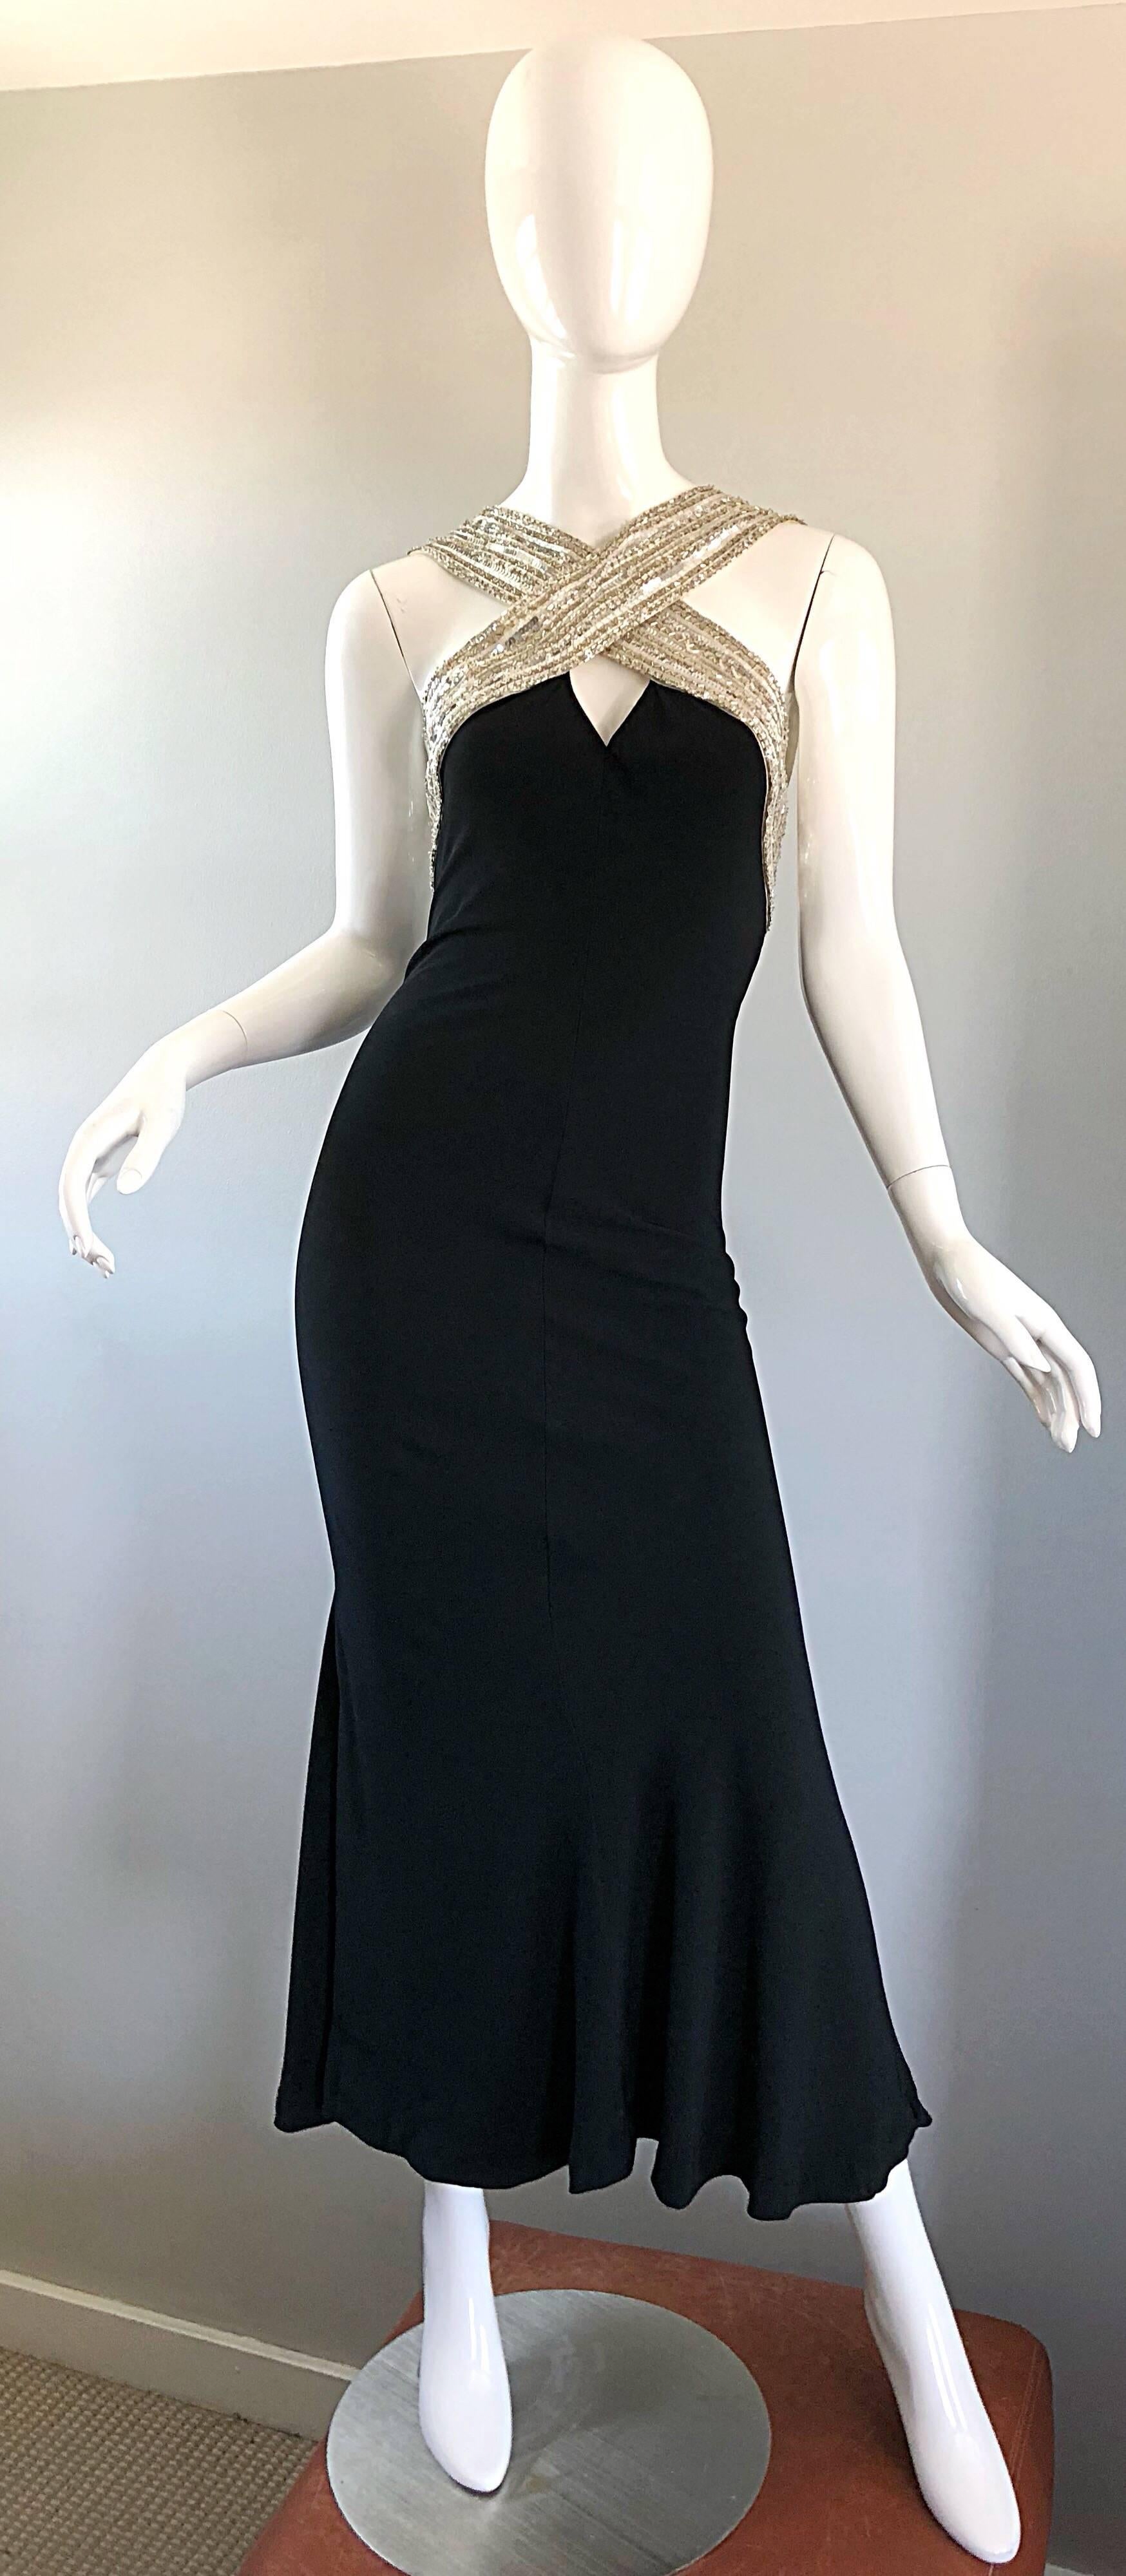 Stunning vintage 90s BOB MACKIE black and silver sequined mermaid hem full length evening dress! Flattering criss-cross halter straps with a key-hole above the bust. Low cut back reveals just the right amount of skin. Thousands of hand-sewn silver